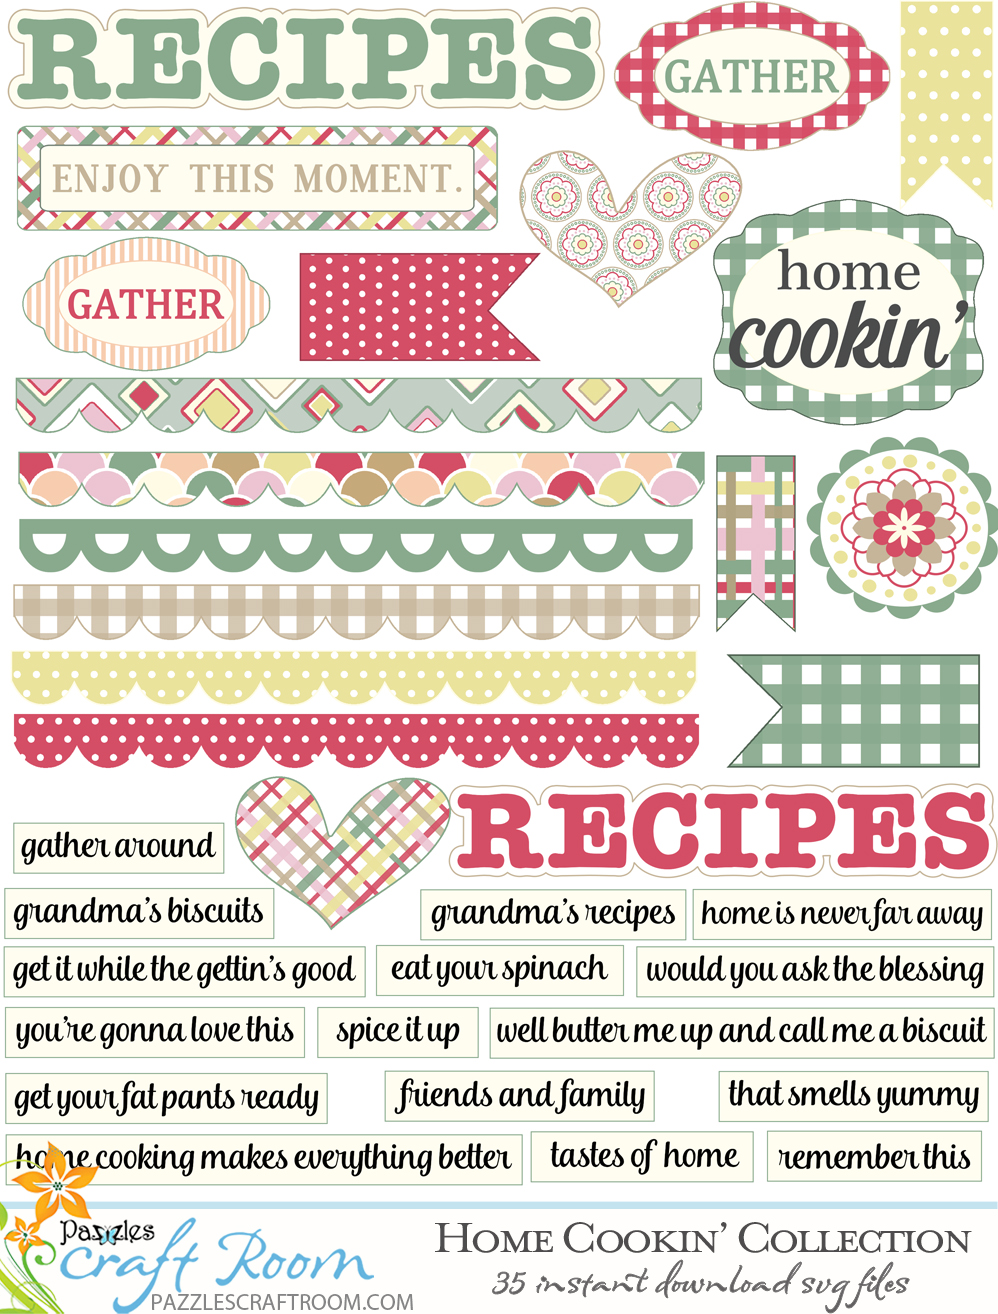 Pazzles DIY Home Cooking SVG Files. Collection of 35 instant download SVG compatible with all major electronic cutters including Pazzles Inspiration, Cricut, and Silhouette Cameo. Desigs by Leslie Peppers.